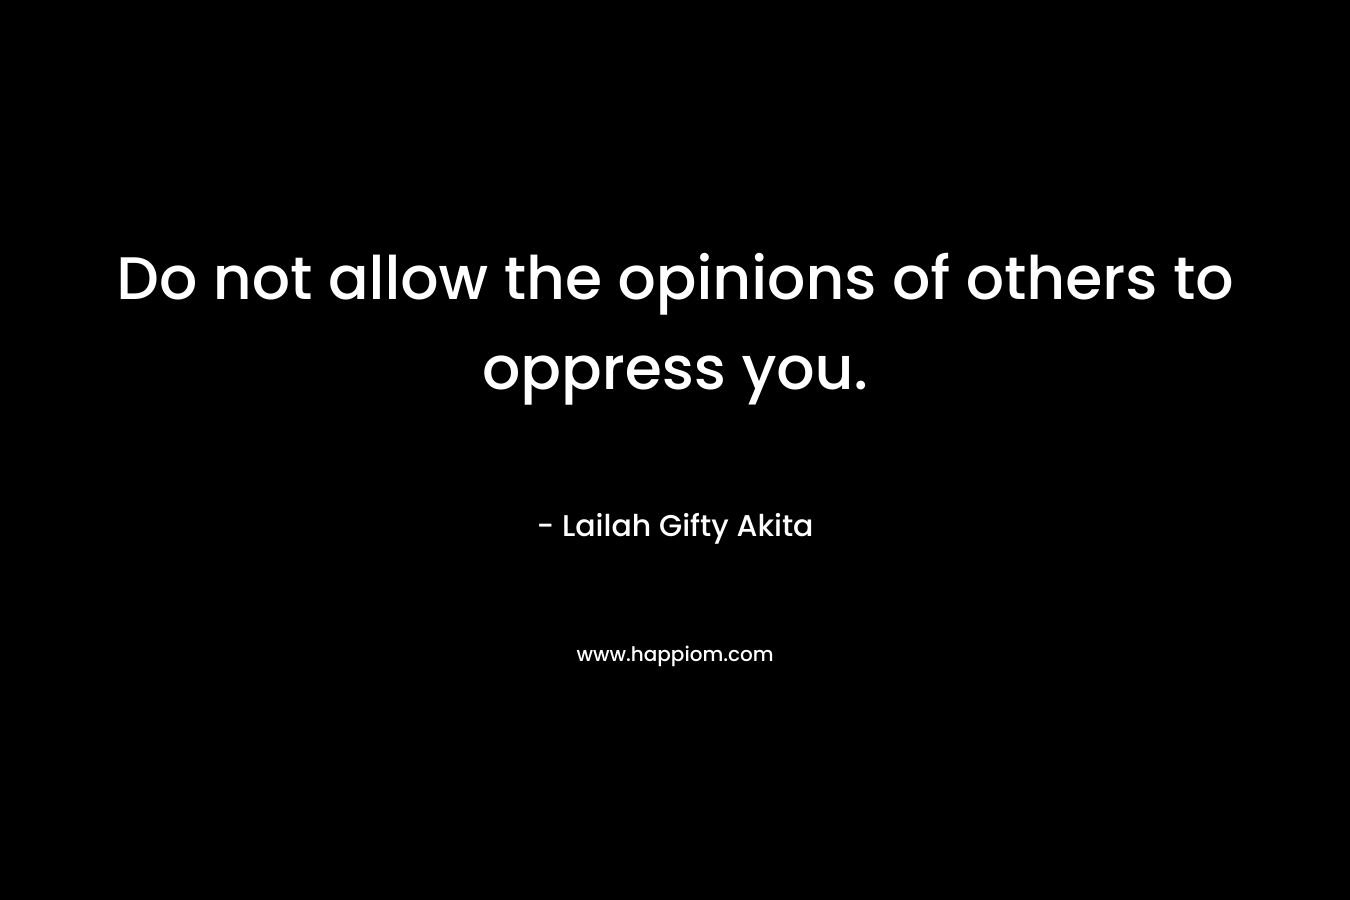 Do not allow the opinions of others to oppress you. – Lailah Gifty Akita